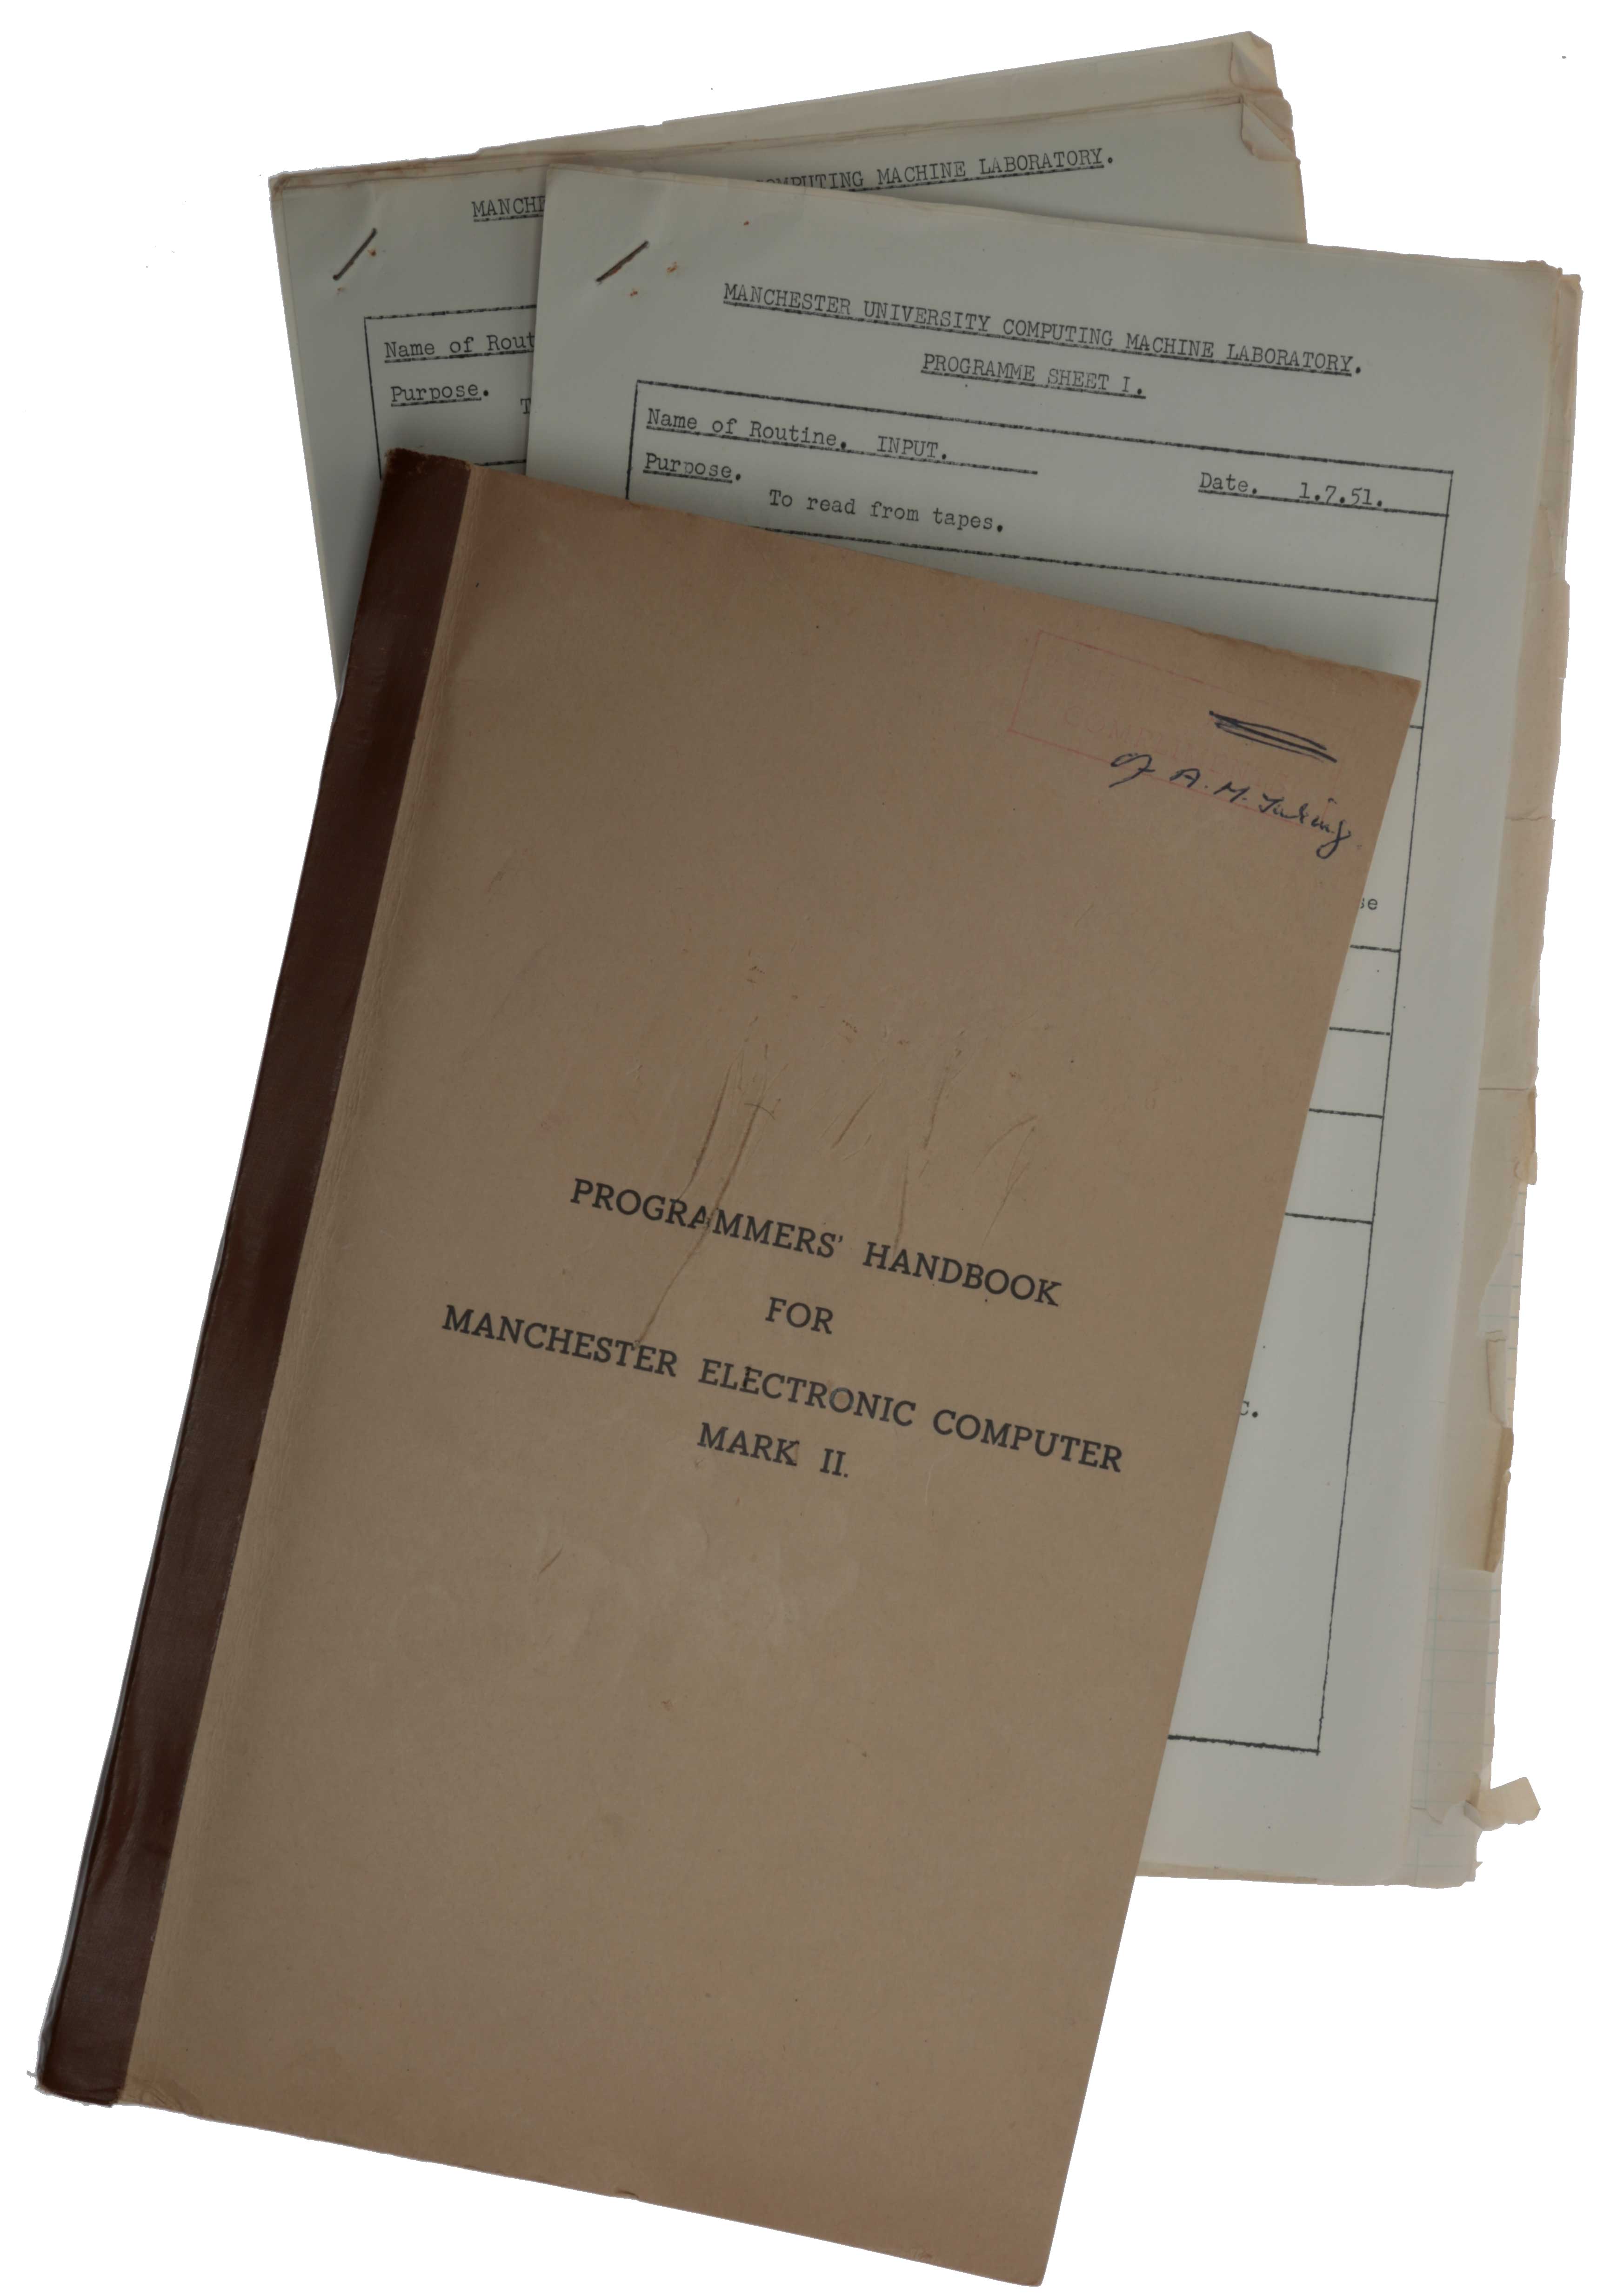 Item #6191 Programmers’ Handbook for Manchester Electronic Computer Mark II [i.e., the Ferranti Mark I], [late 1950 or early 1951]. With errata sheets dated March 13, March 28, and July 9, 1951. [With:] Mimeographed letter from Turing stating that copies of library subroutines may be sent to holders of the Handbook. [And with:] Four examples of such subroutines. Alan Mathison TURING.